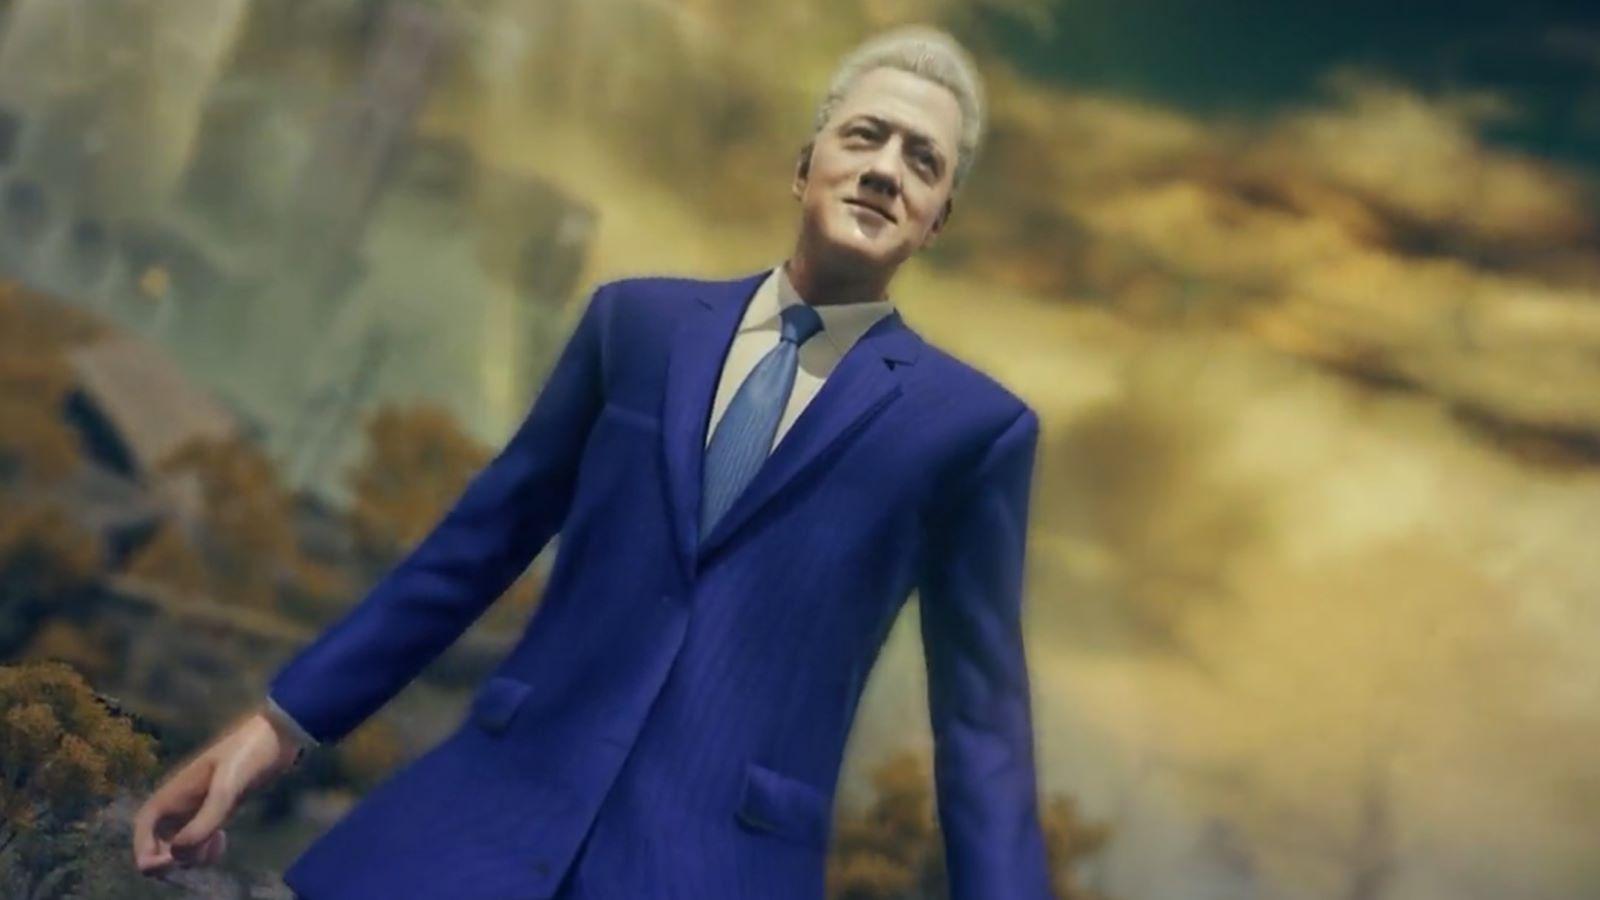 Elden Ring: Bill Clinton Mod Surfaces After Game Awards Stage Crash and More